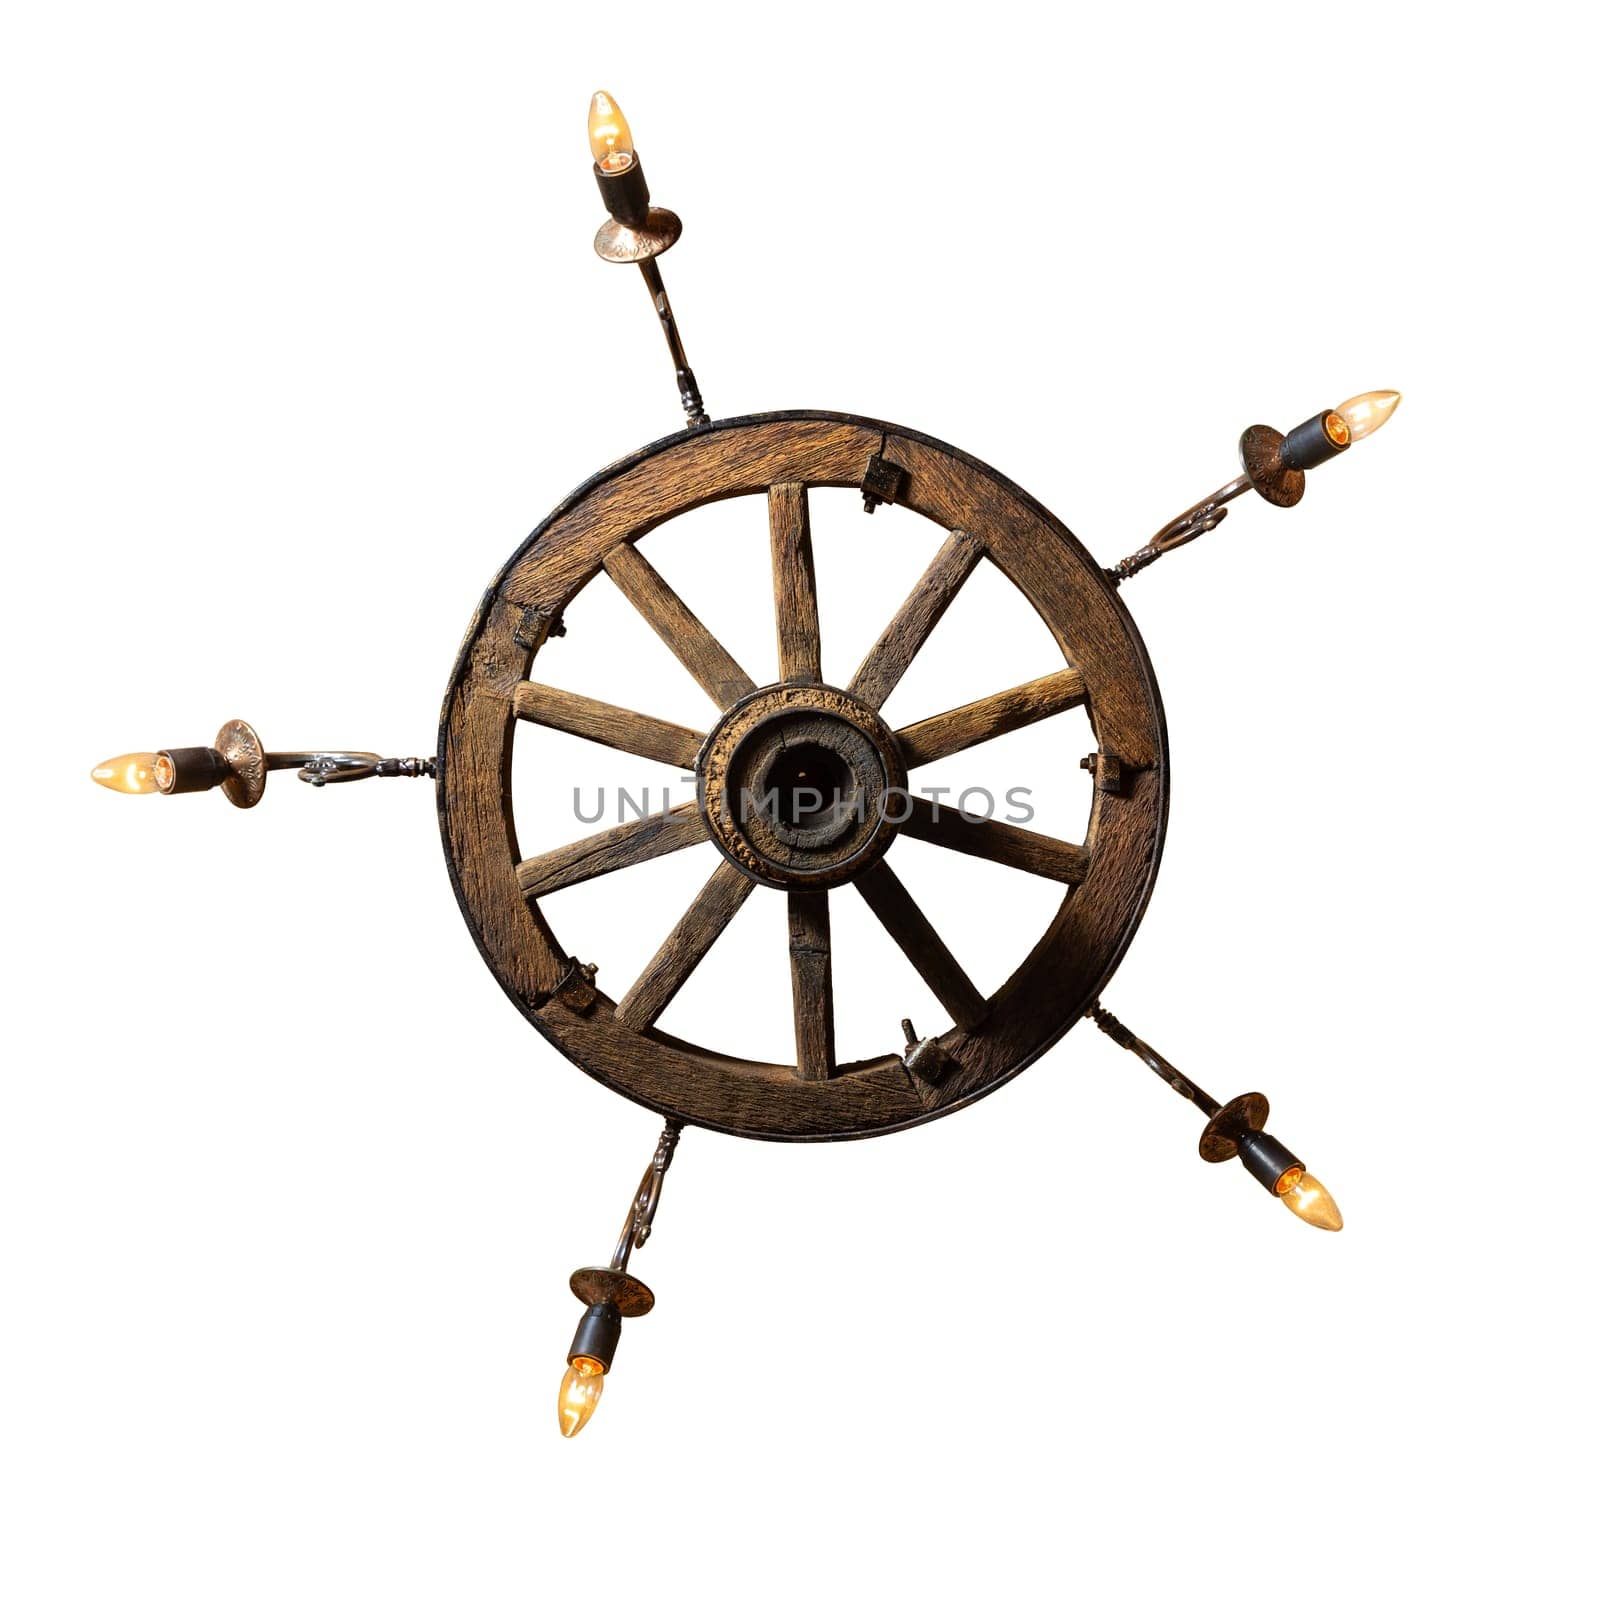 Decorative chandelier from a trolley wheel with chains and with concealed wiring. Rustic chandelier made from wood wagon wheel isolated on white. Bottom view.